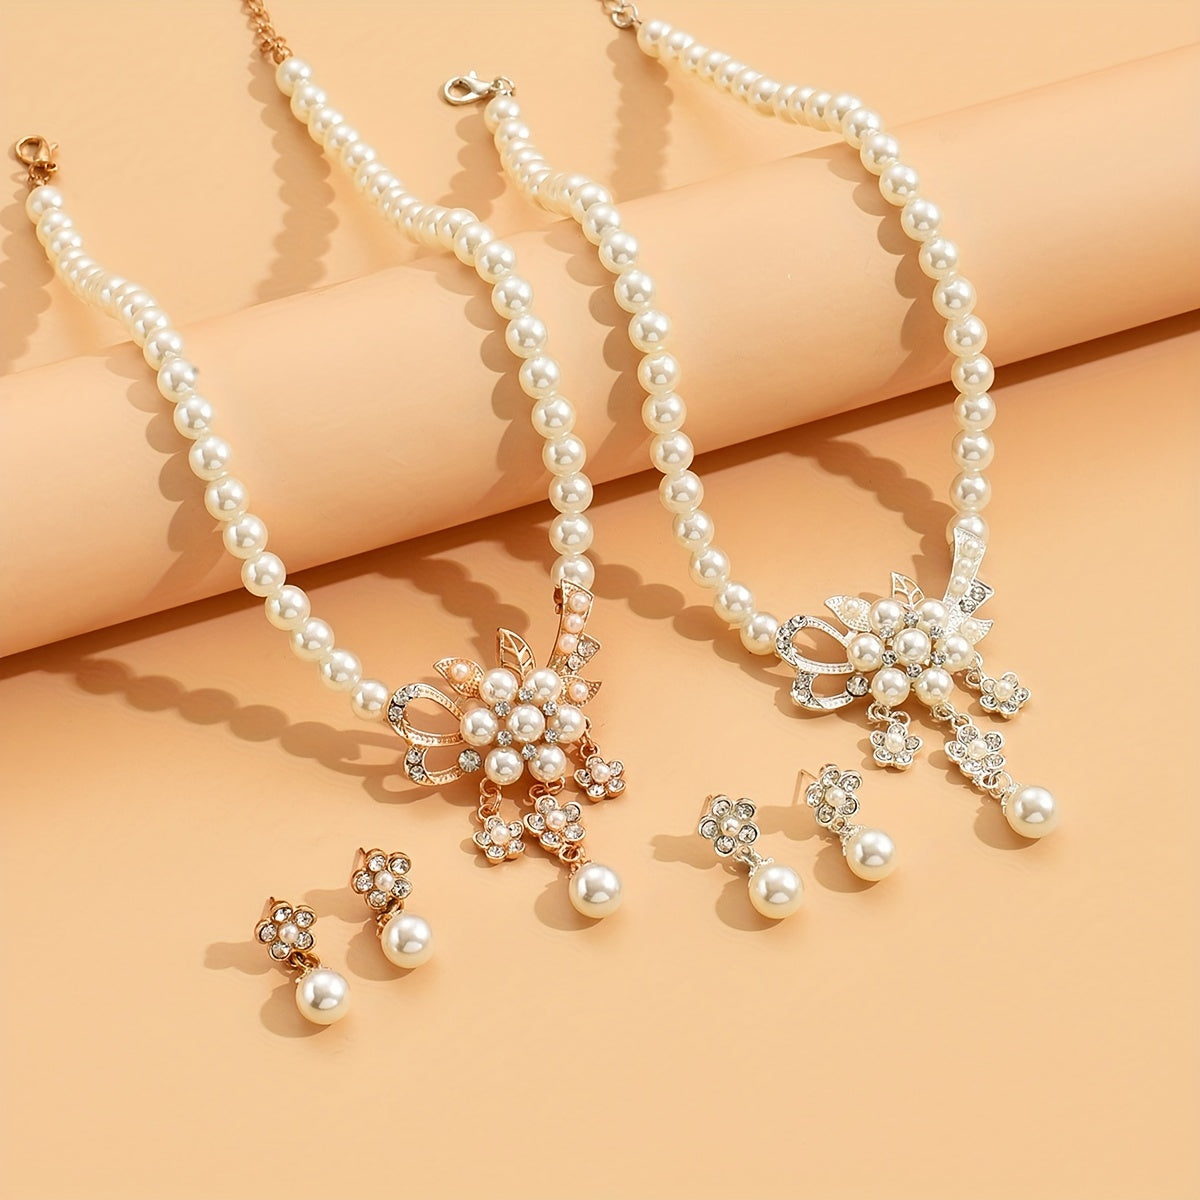 Complete Your Look with our Flower Pendant Faux Pearls Jewelry Set - Perfect for Birthday, Party, and Anniversary!